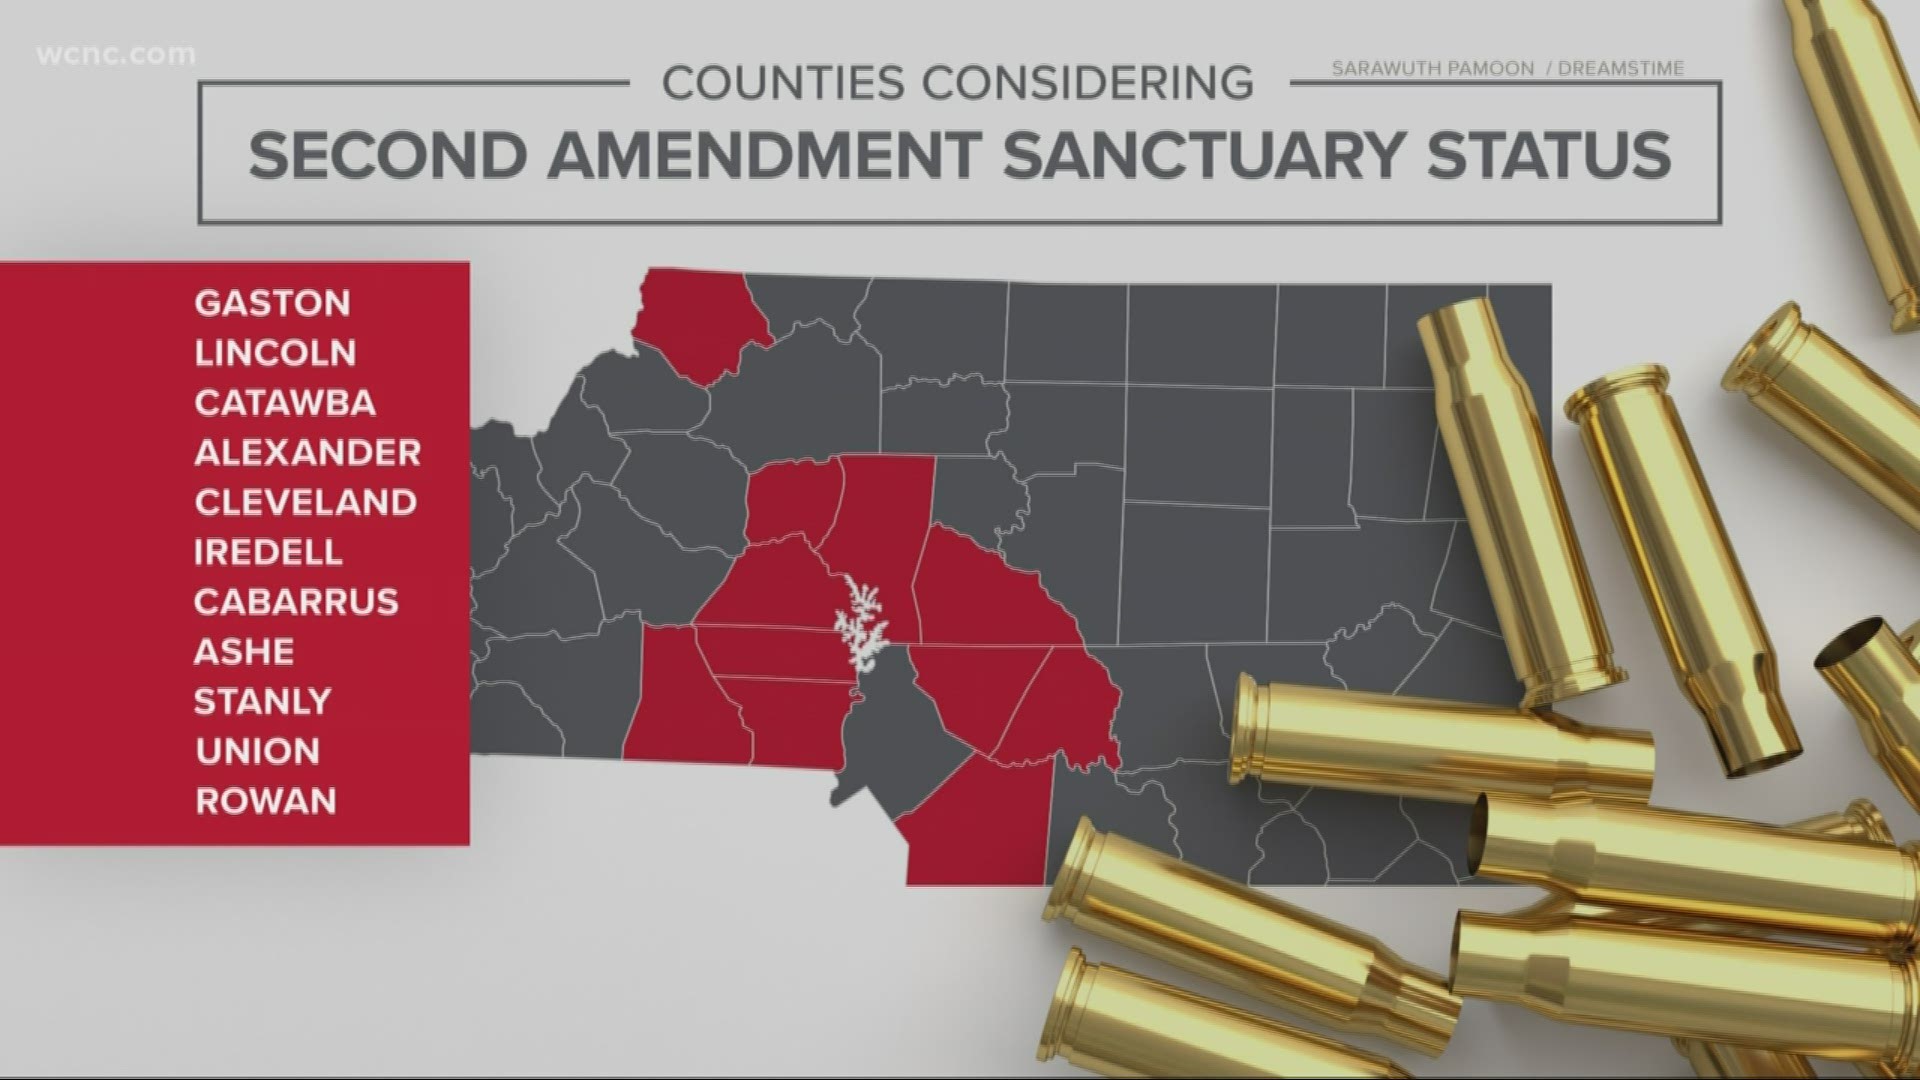 Eleven counties in the Charlotte area have passed or are talking about becoming Second Amendment Sanctuaries, meant to protect the rights of law-abiding gun owners.